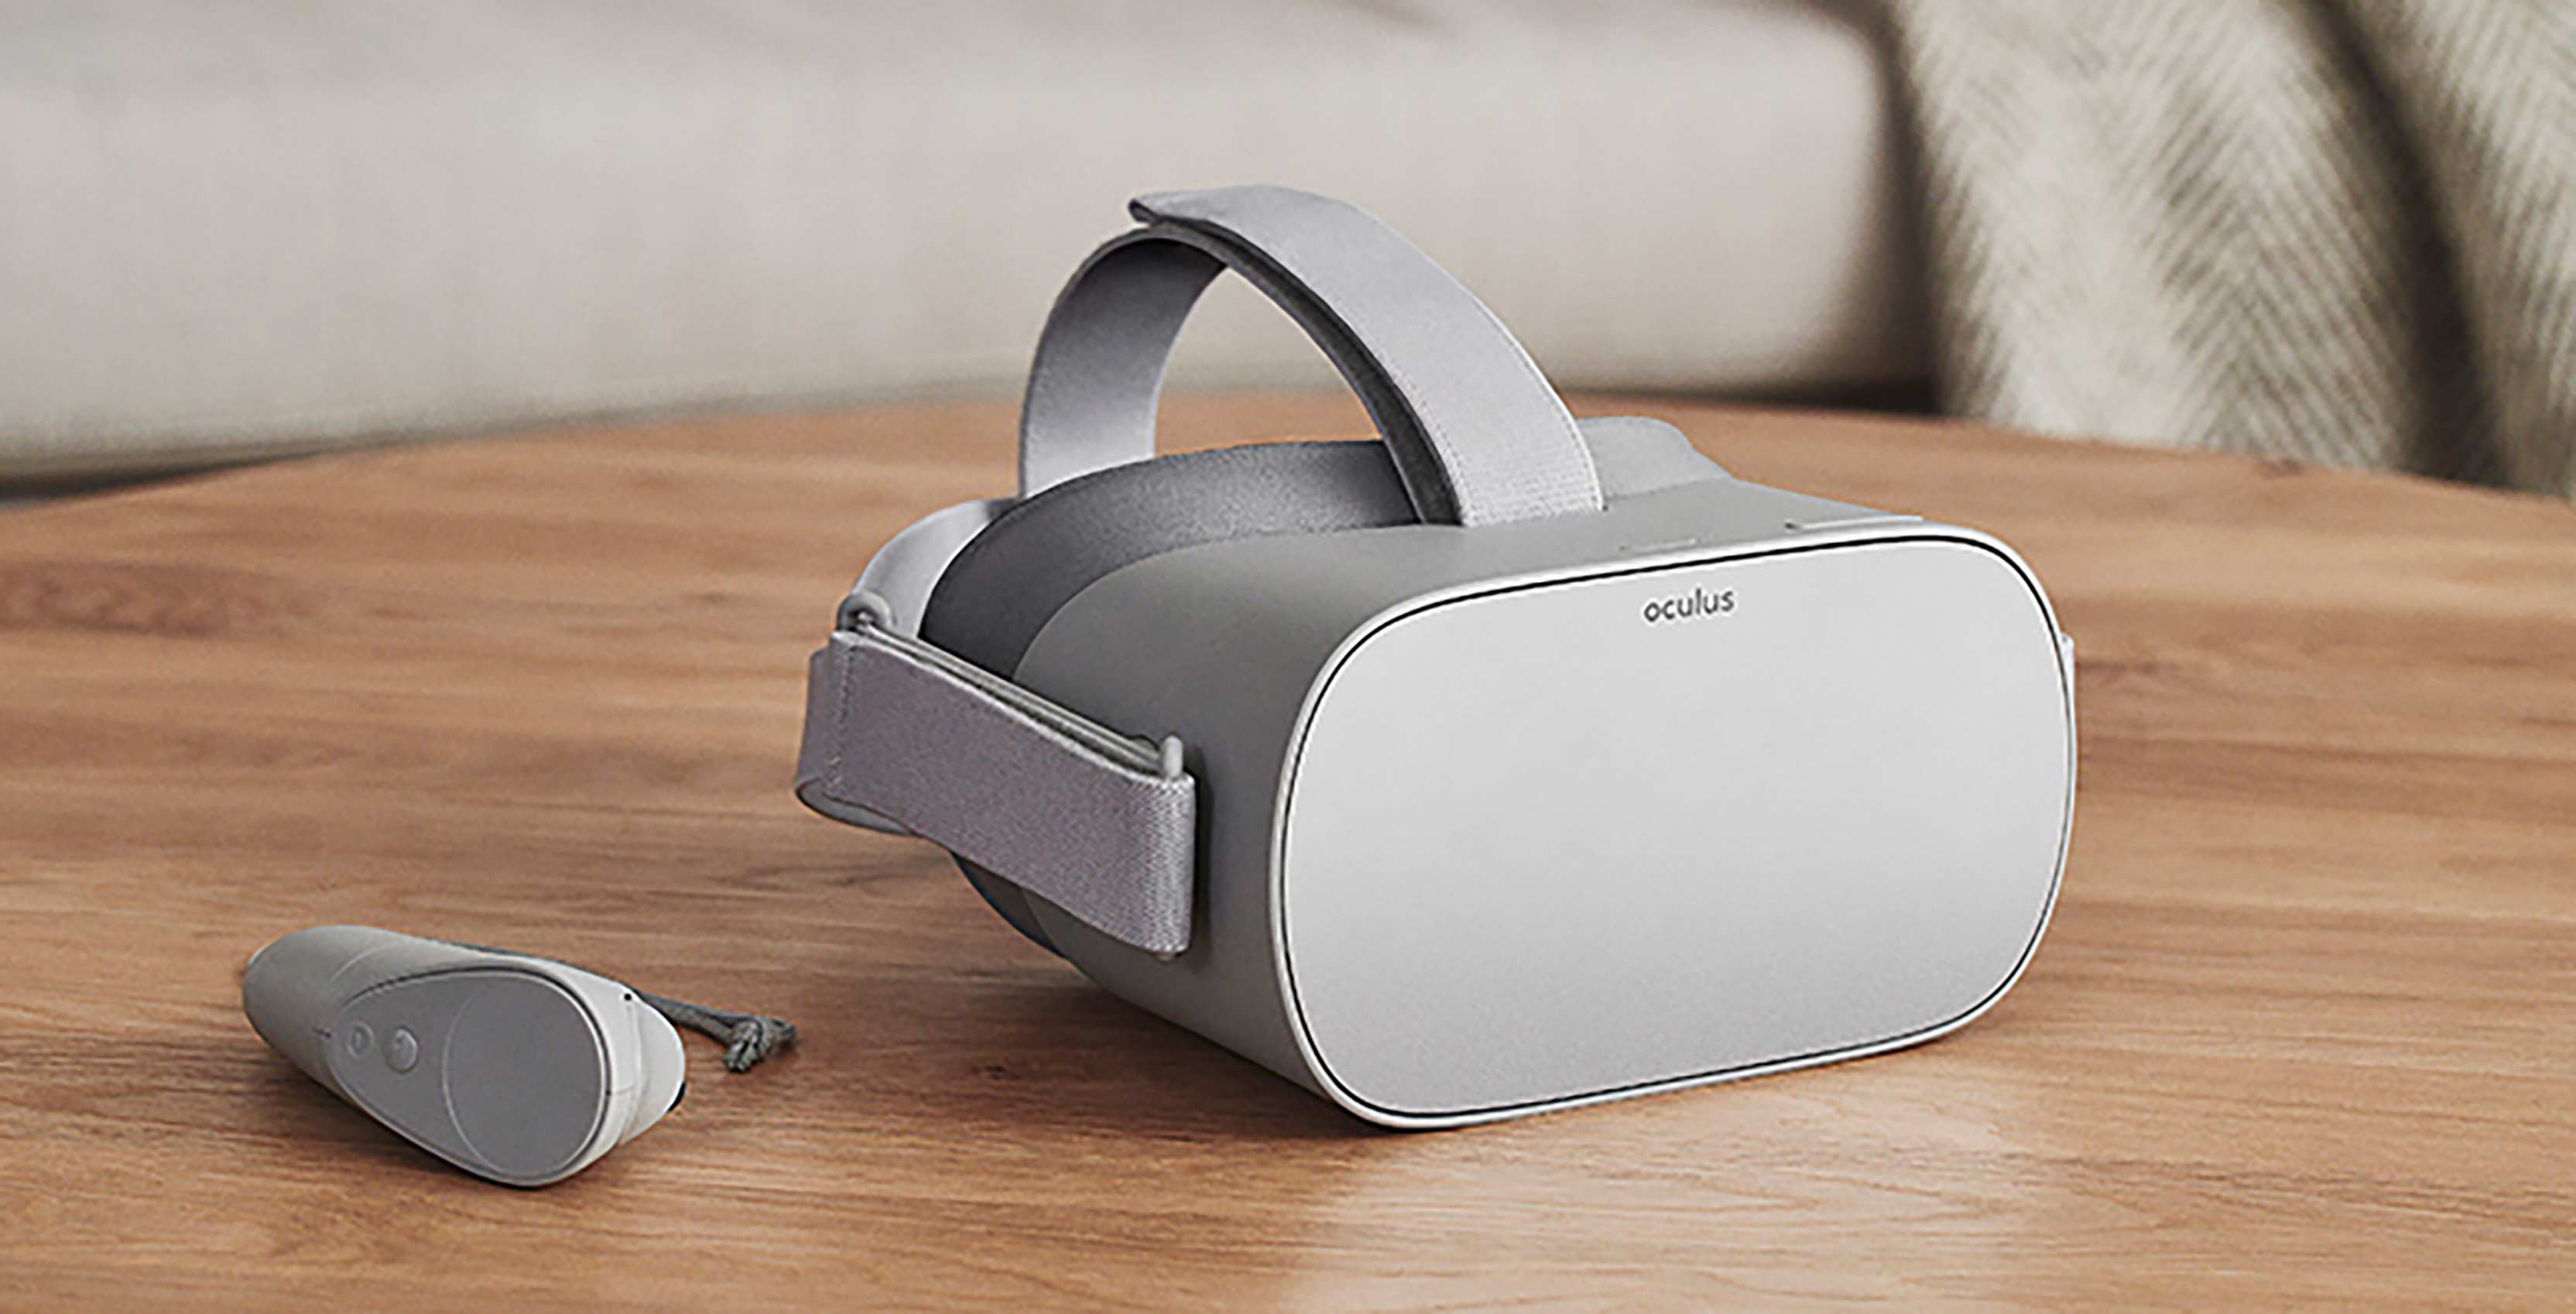 Facebook Pushes Deeper Into Vr With Oculus Go Wireless Headset 